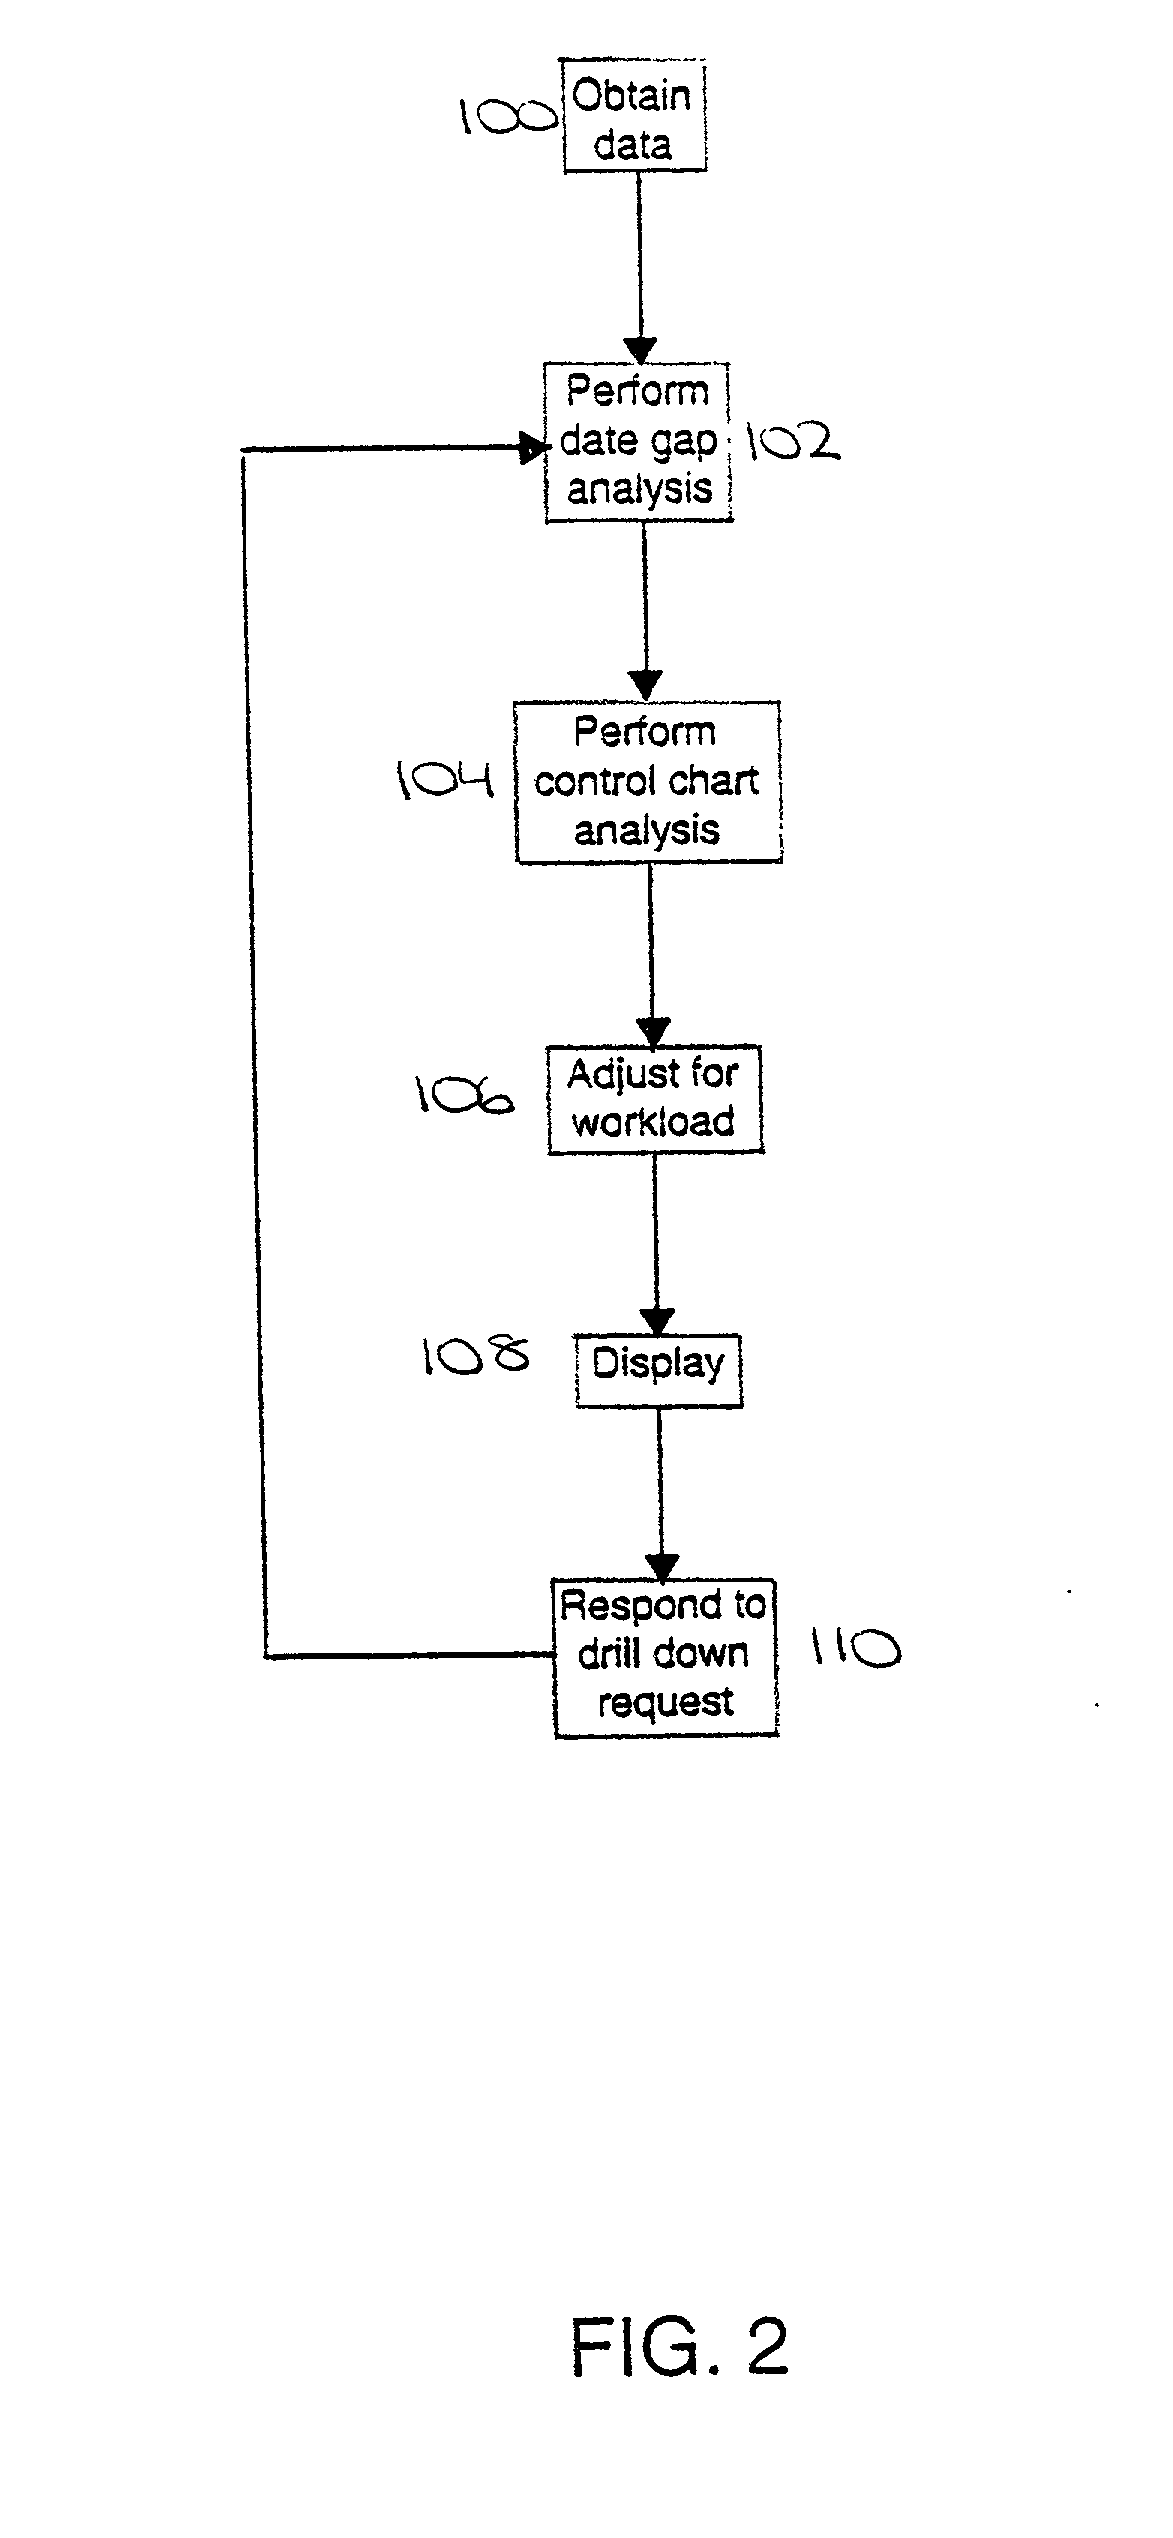 System and method for monitoring and analyzing data trends of interest within an organization